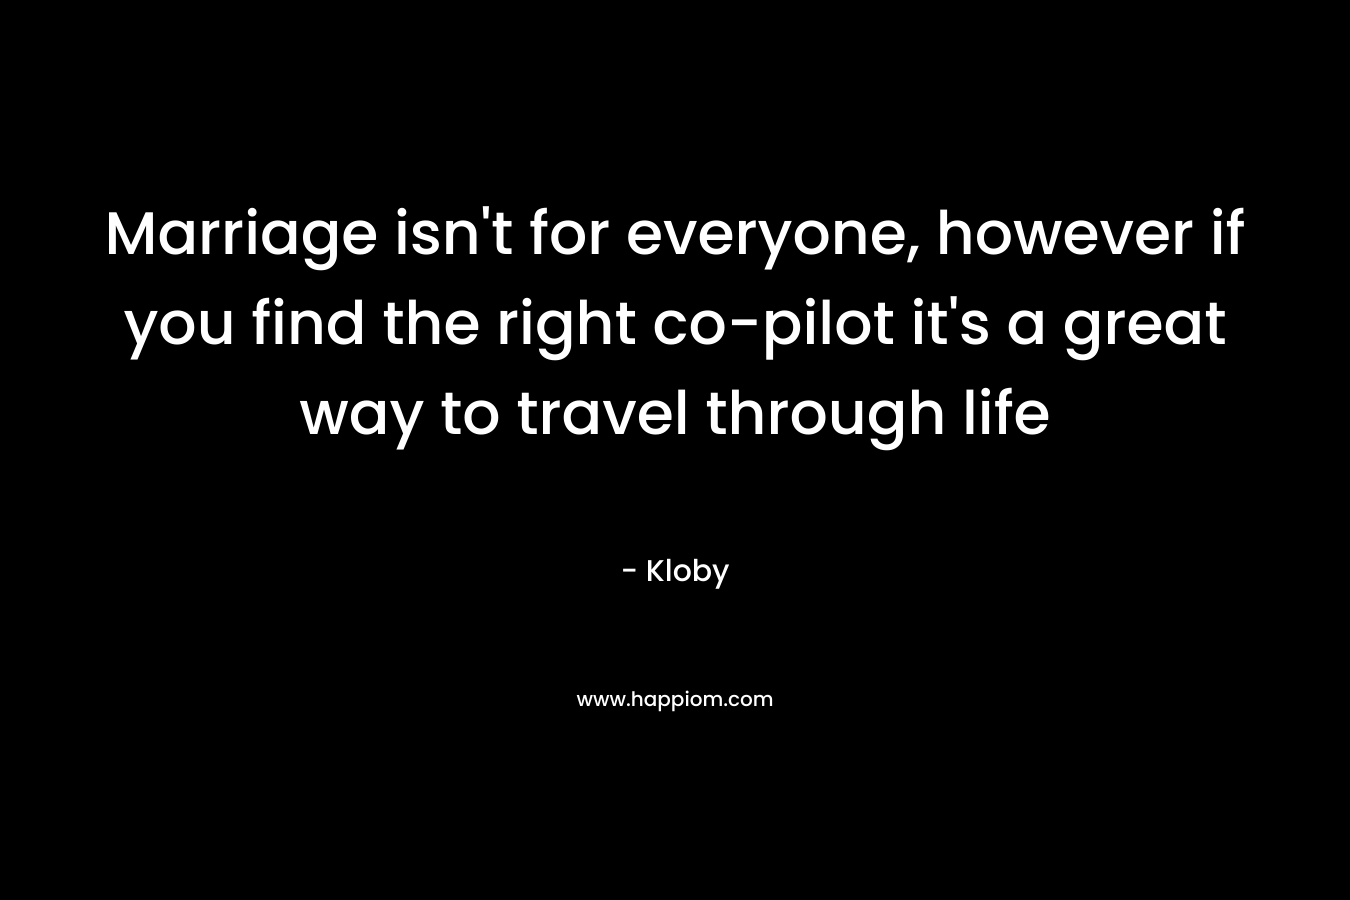 Marriage isn’t for everyone, however if you find the right co-pilot it’s a great way to travel through life  – Kloby